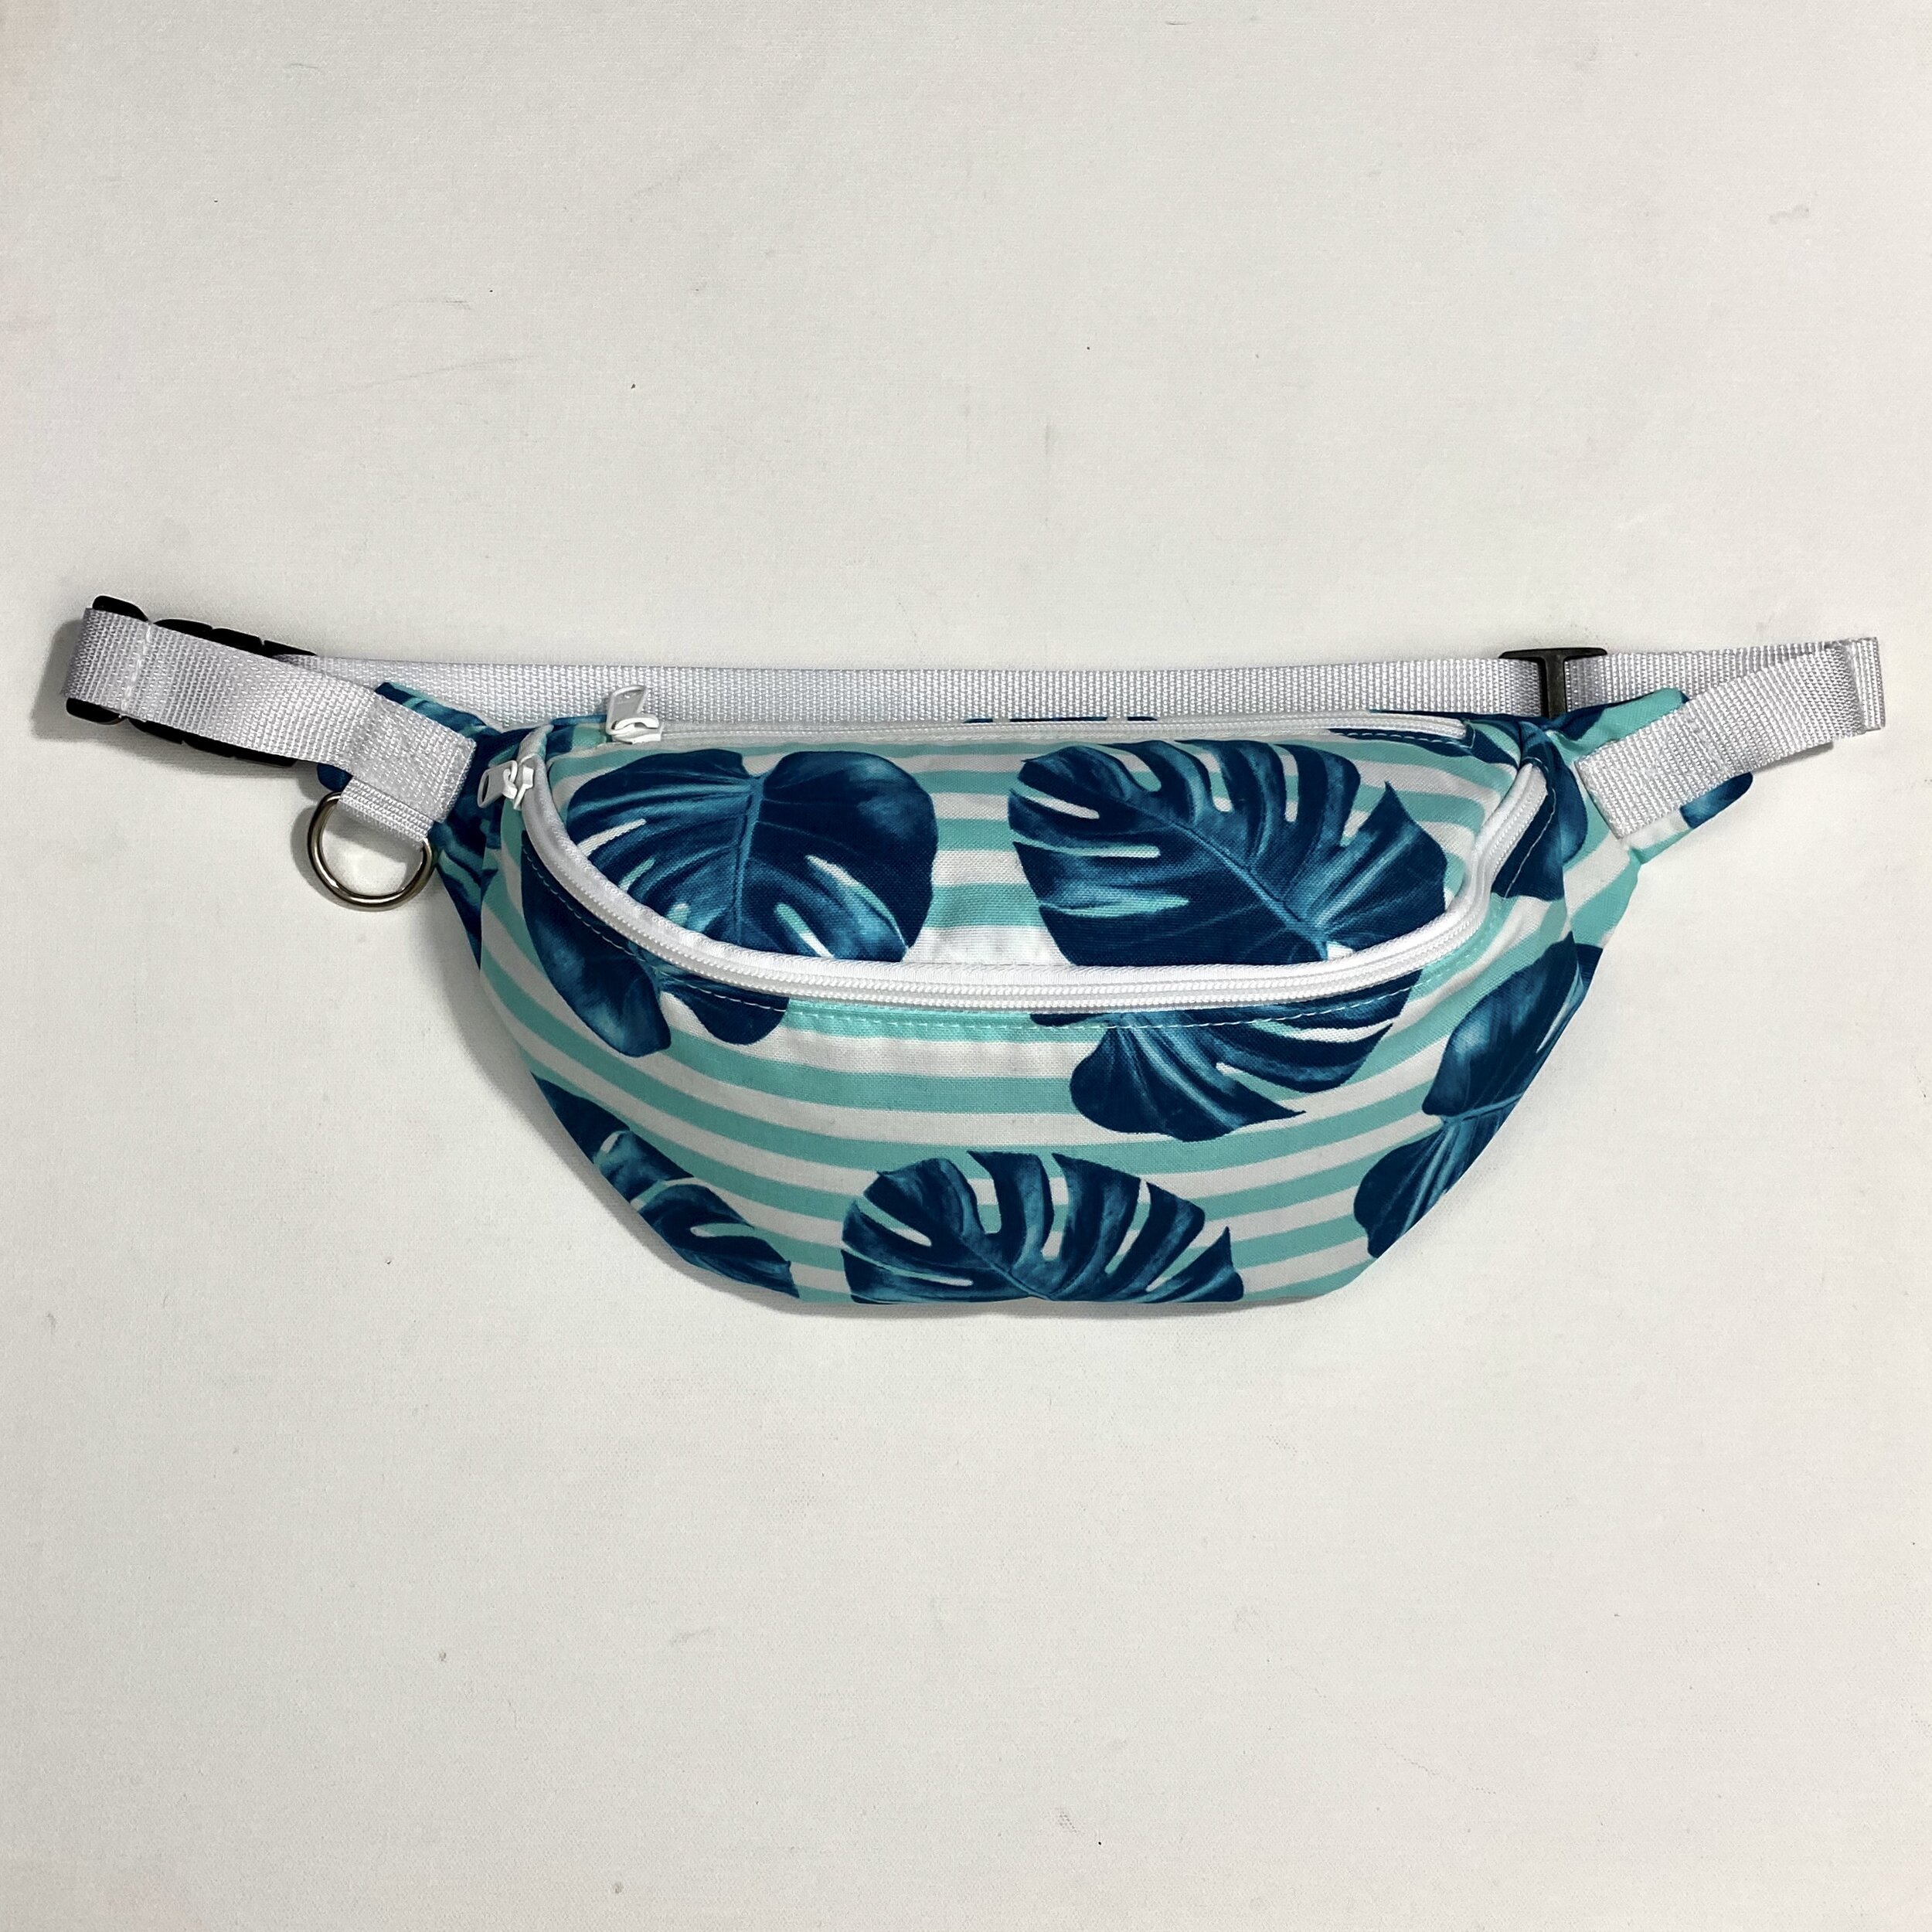 Vlad Spacek - Fanny Packs and Other Goods